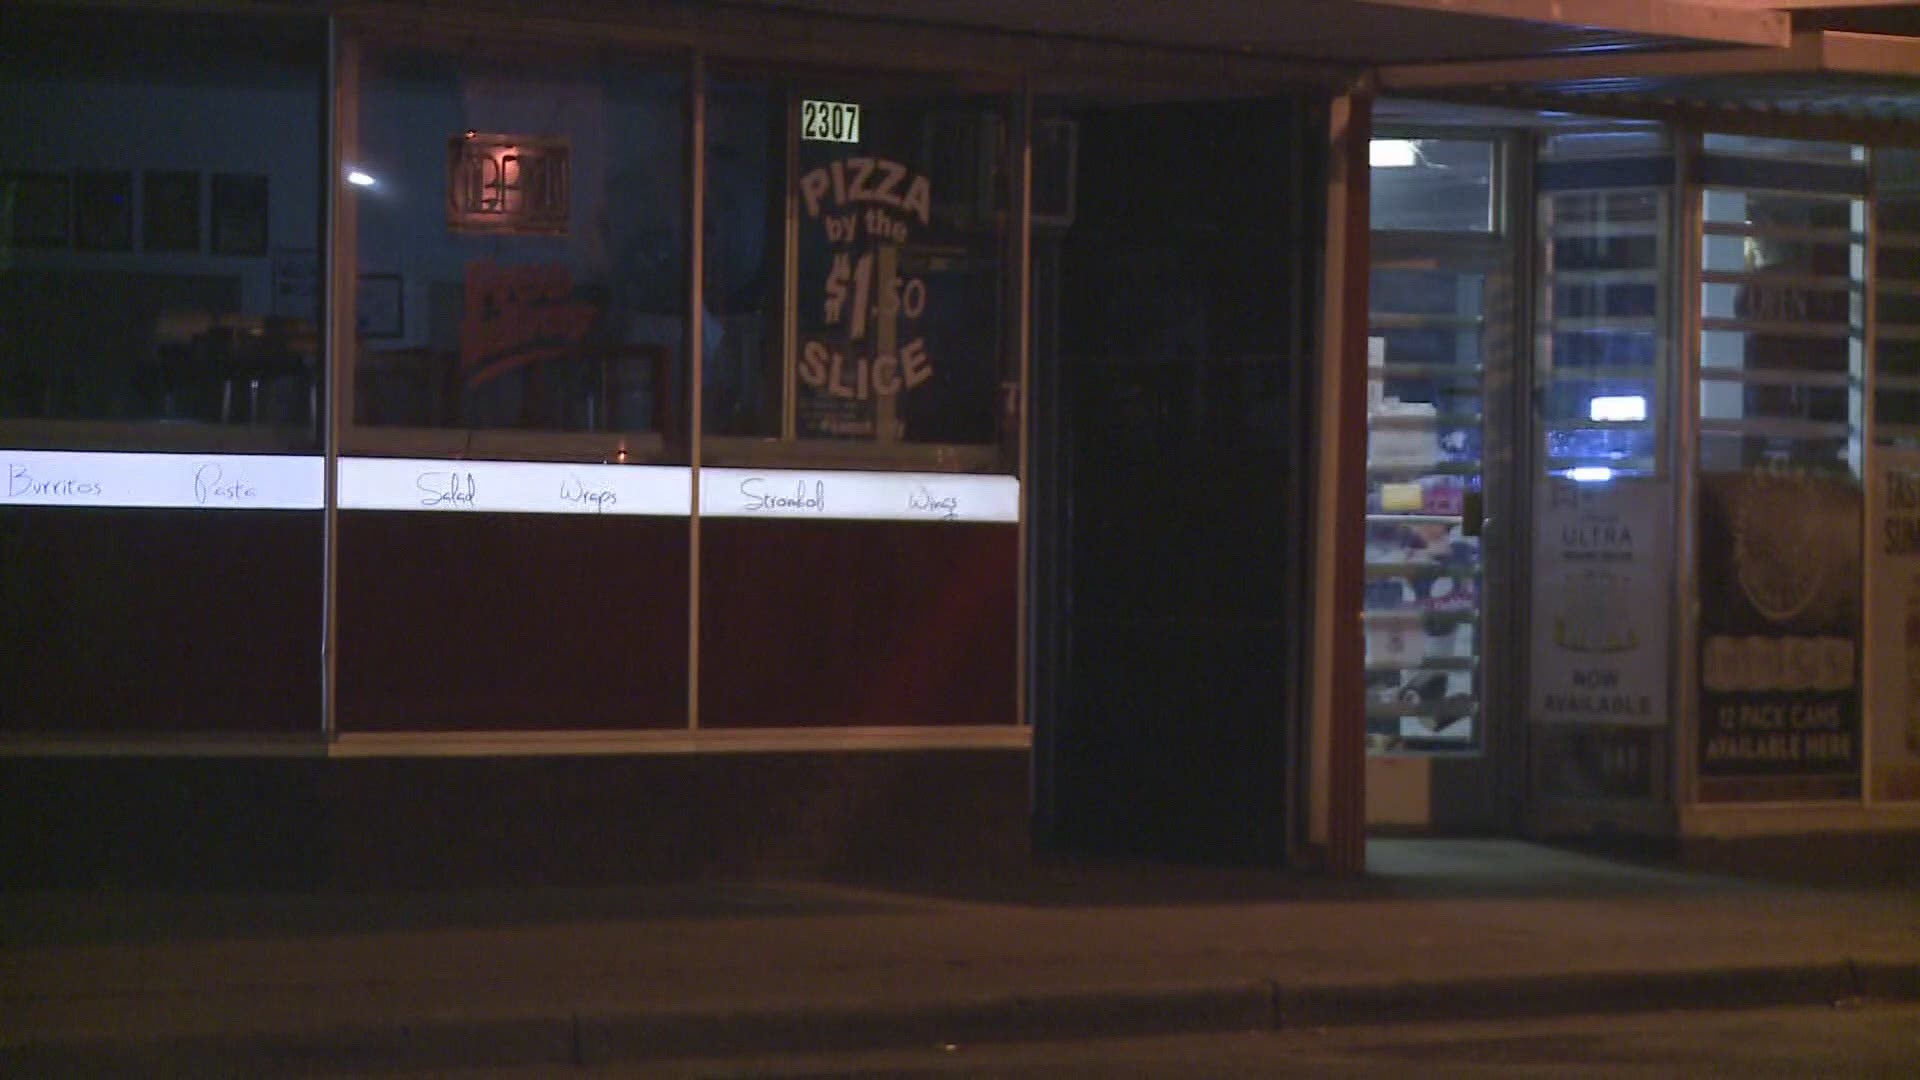 The incident happened at Lombardo’s Pizzeria on Lee Street.